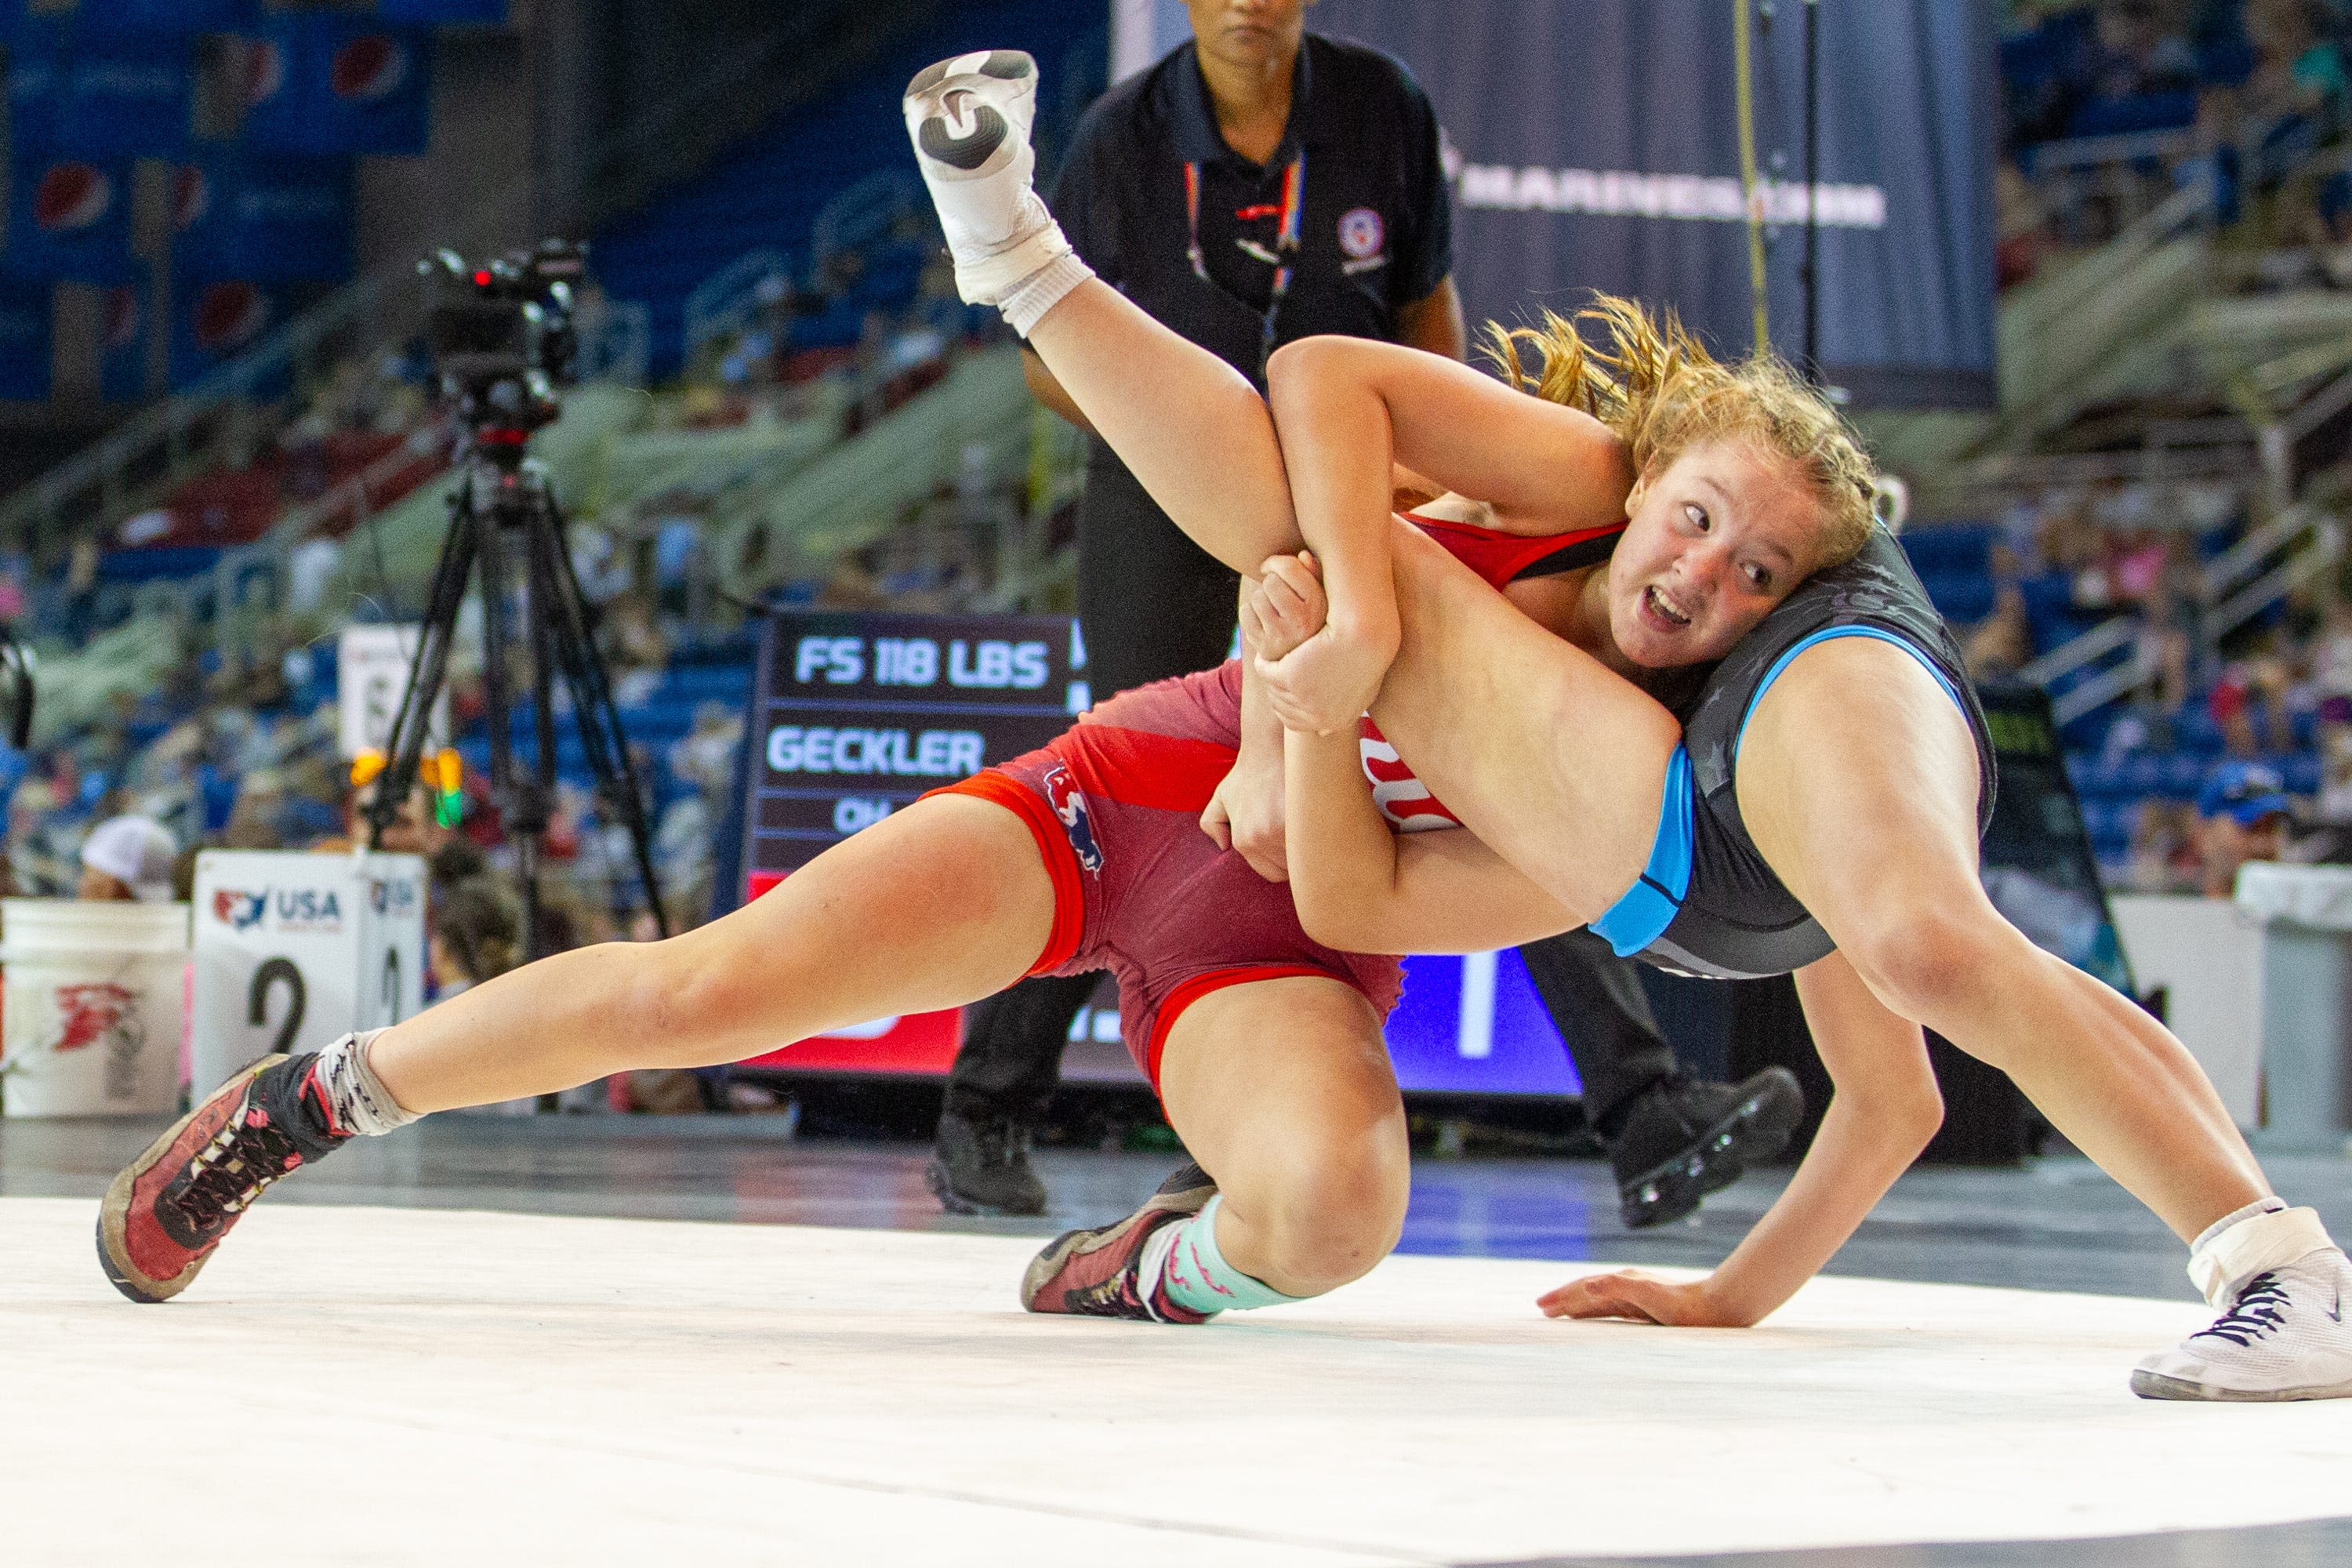 Perry's Carolyn Gecker is already an All-American, will wrestle in 16U national semifinal